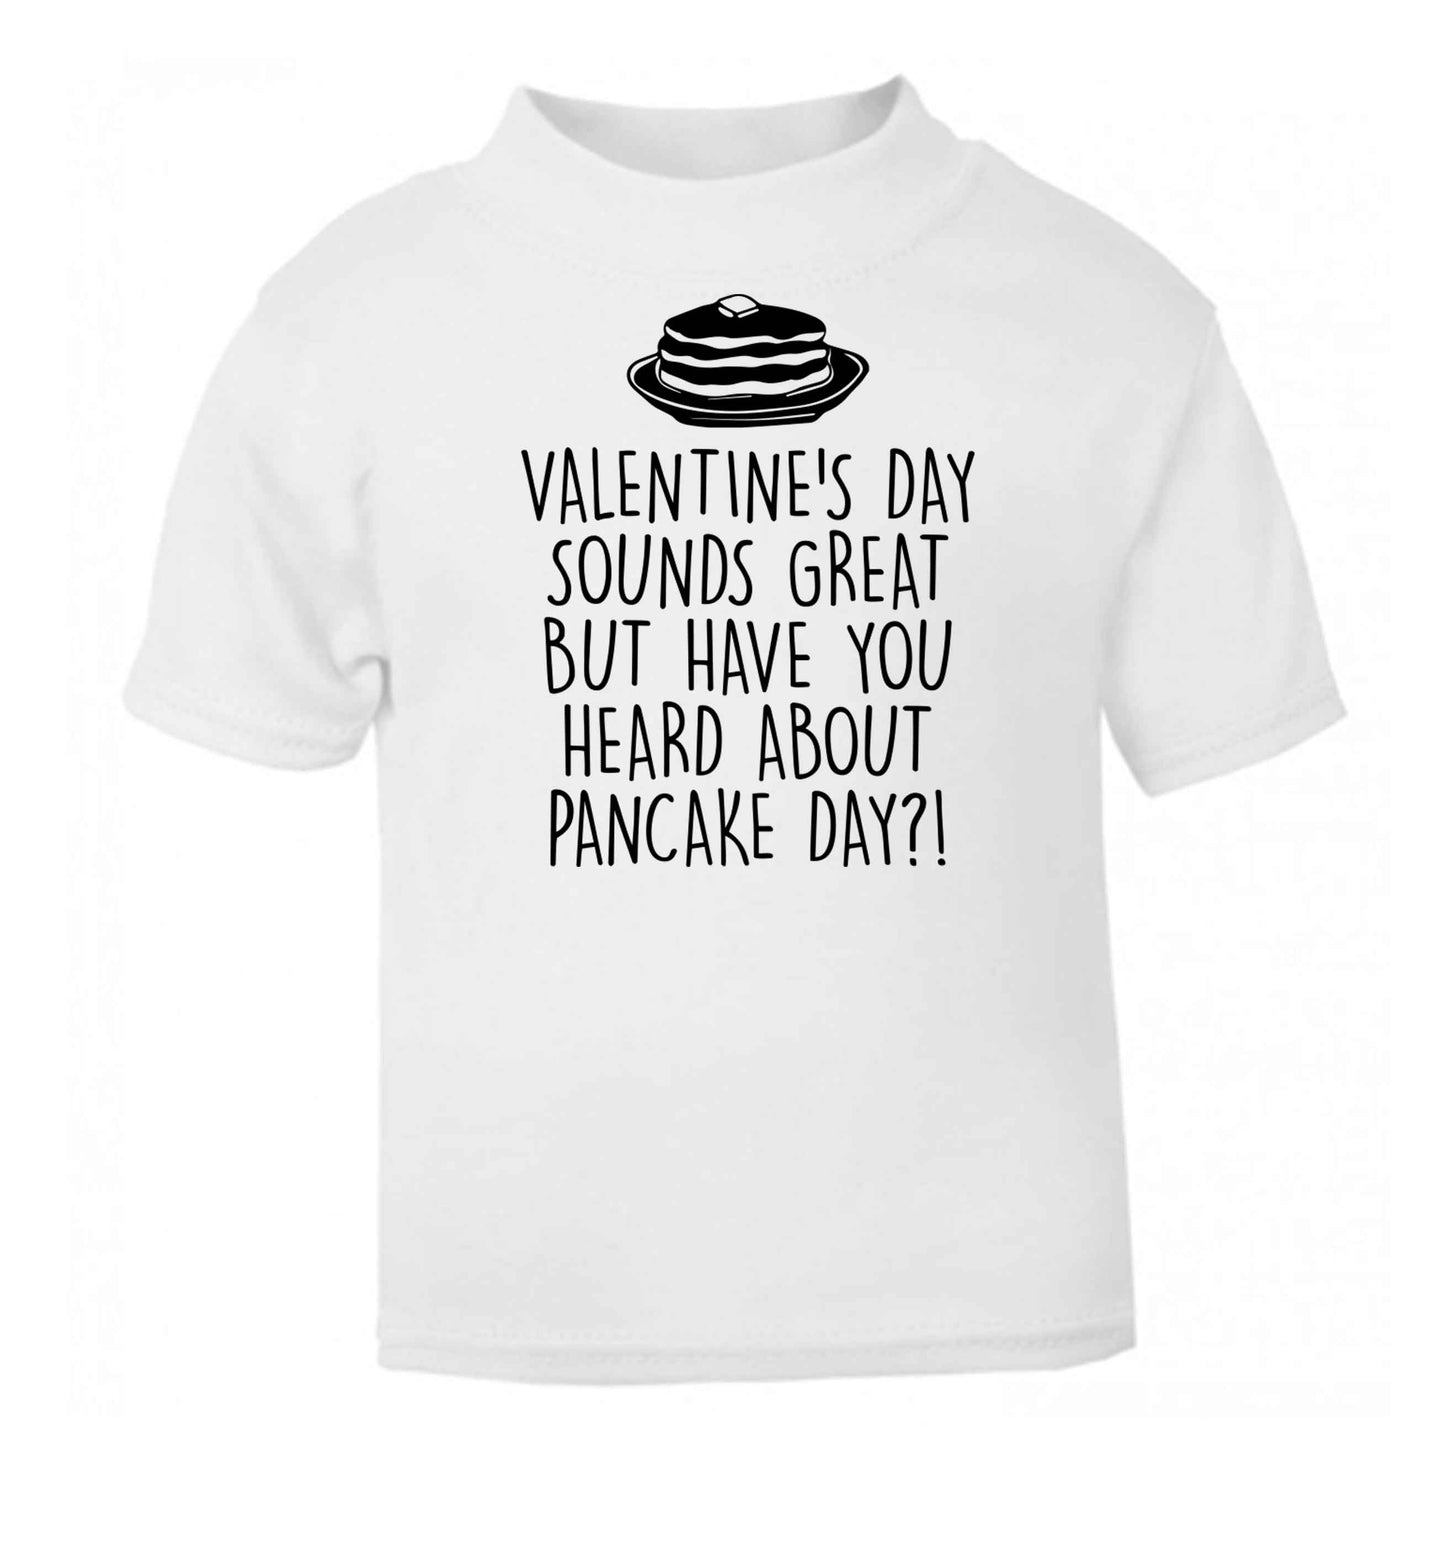 Valentine's day sounds great but have you heard about pancake day?! white baby toddler Tshirt 2 Years